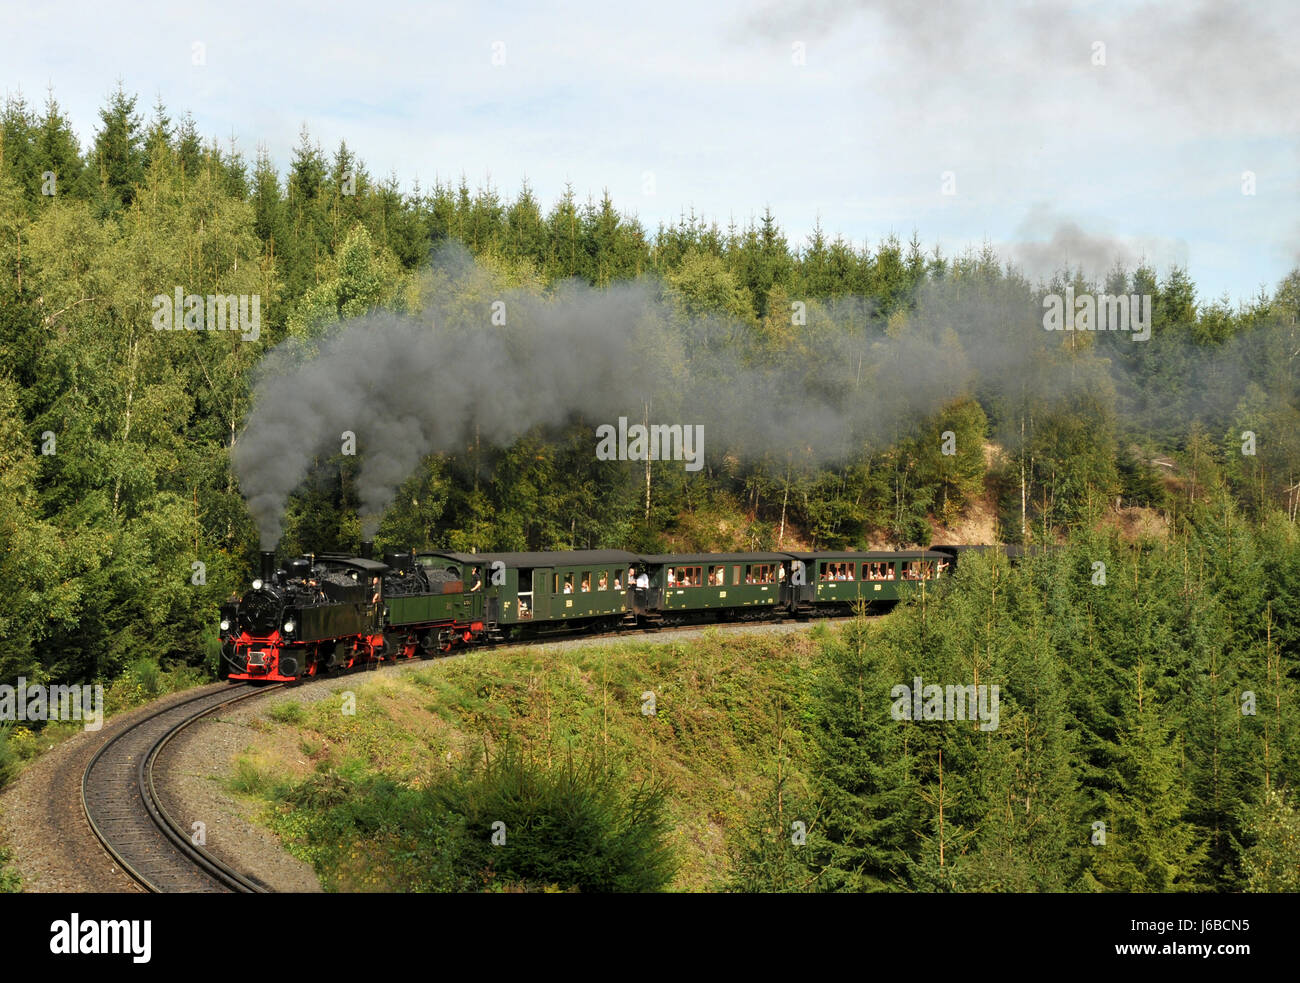 railway locomotive train engine rolling stock vehicle means of travel steam Stock Photo